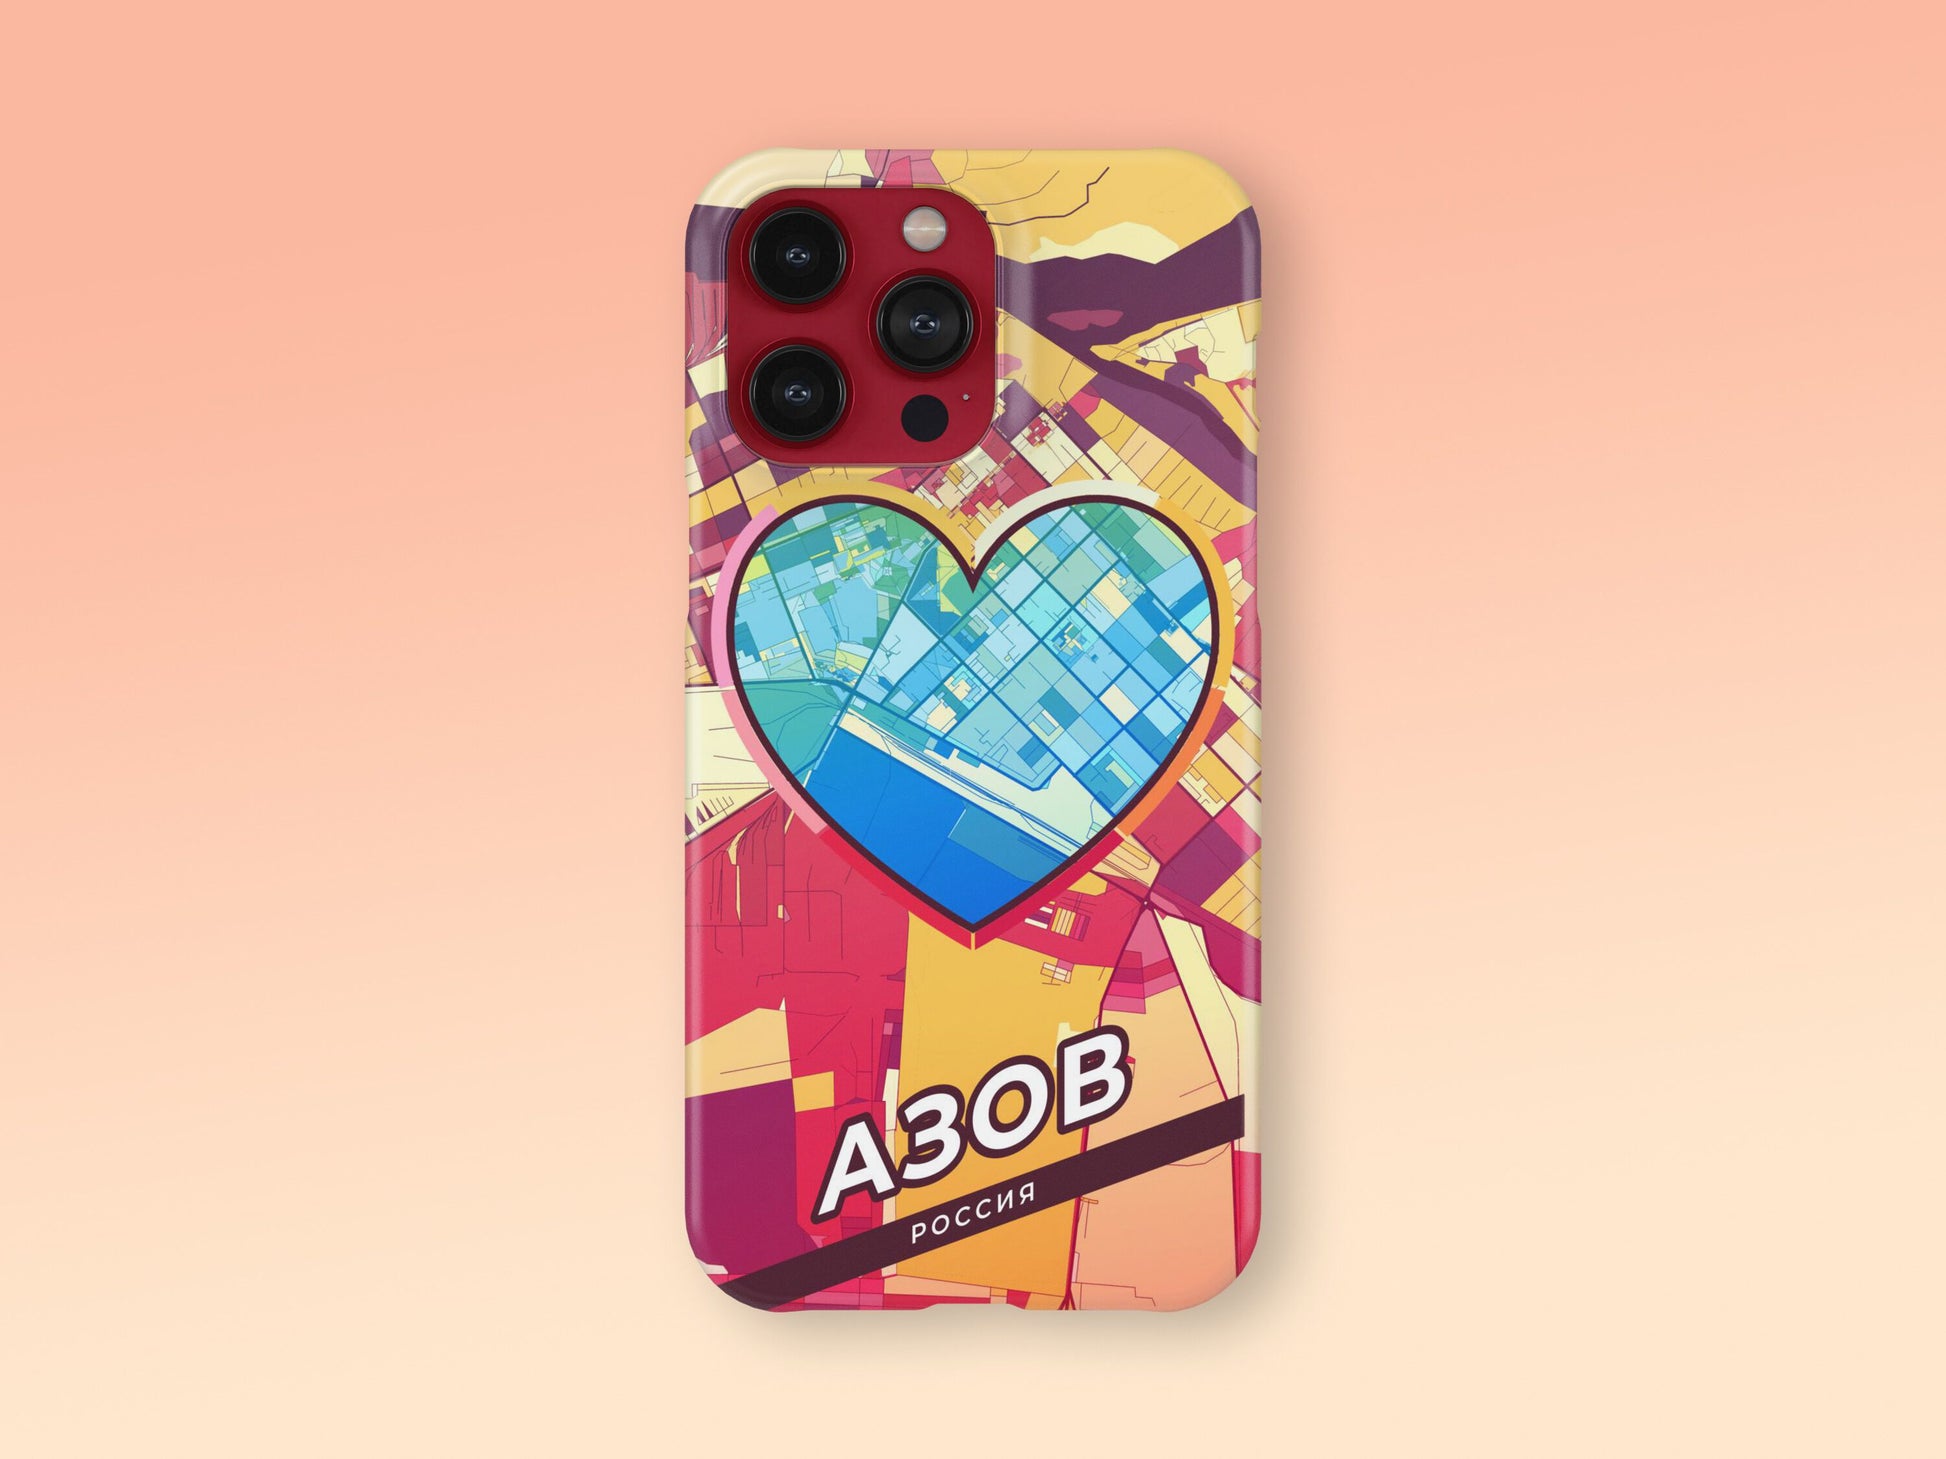 Azov Russia slim phone case with colorful icon. Birthday, wedding or housewarming gift. Couple match cases. 2